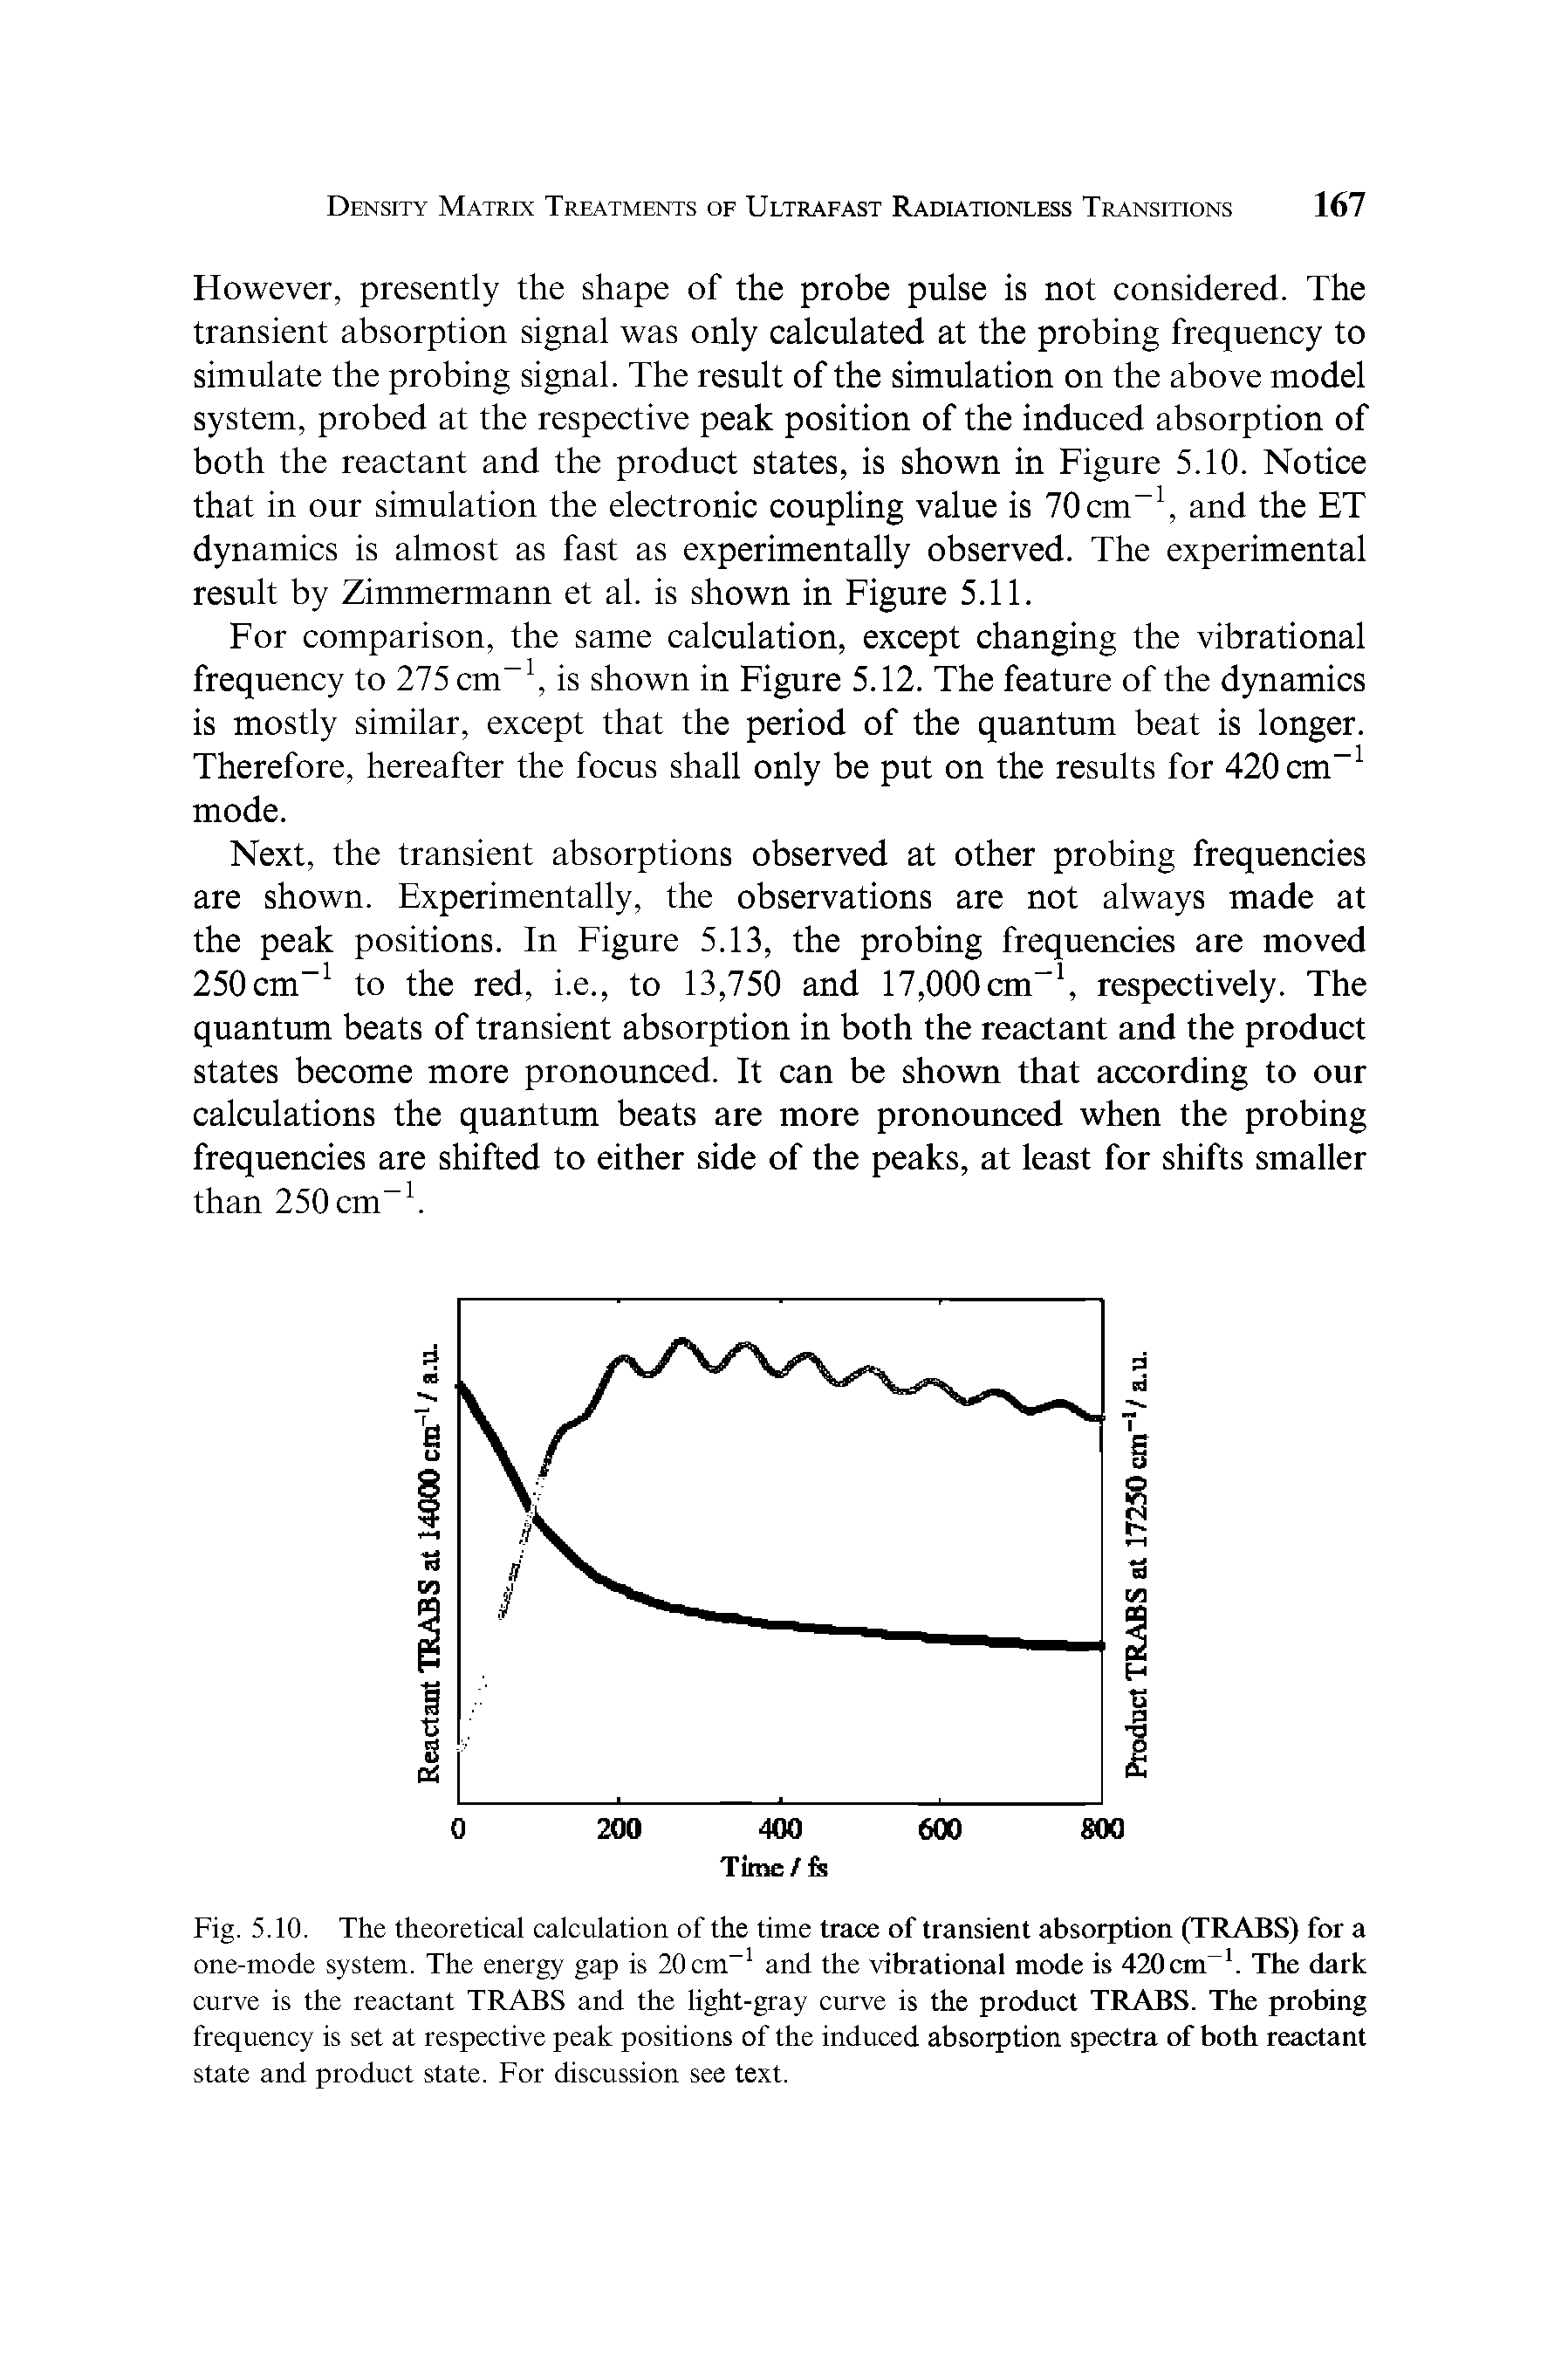 Fig. 5.10. The theoretical calculation of the time trace of transient absorption (TRABS) for a one-mode system. The energy gap is 20 cm-1 and the vibrational mode is 420 cm-1. The dark curve is the reactant TRABS and the light-gray curve is the product TRABS. The probing frequency is set at respective peak positions of the induced absorption spectra of both reactant state and product state. For discussion see text.